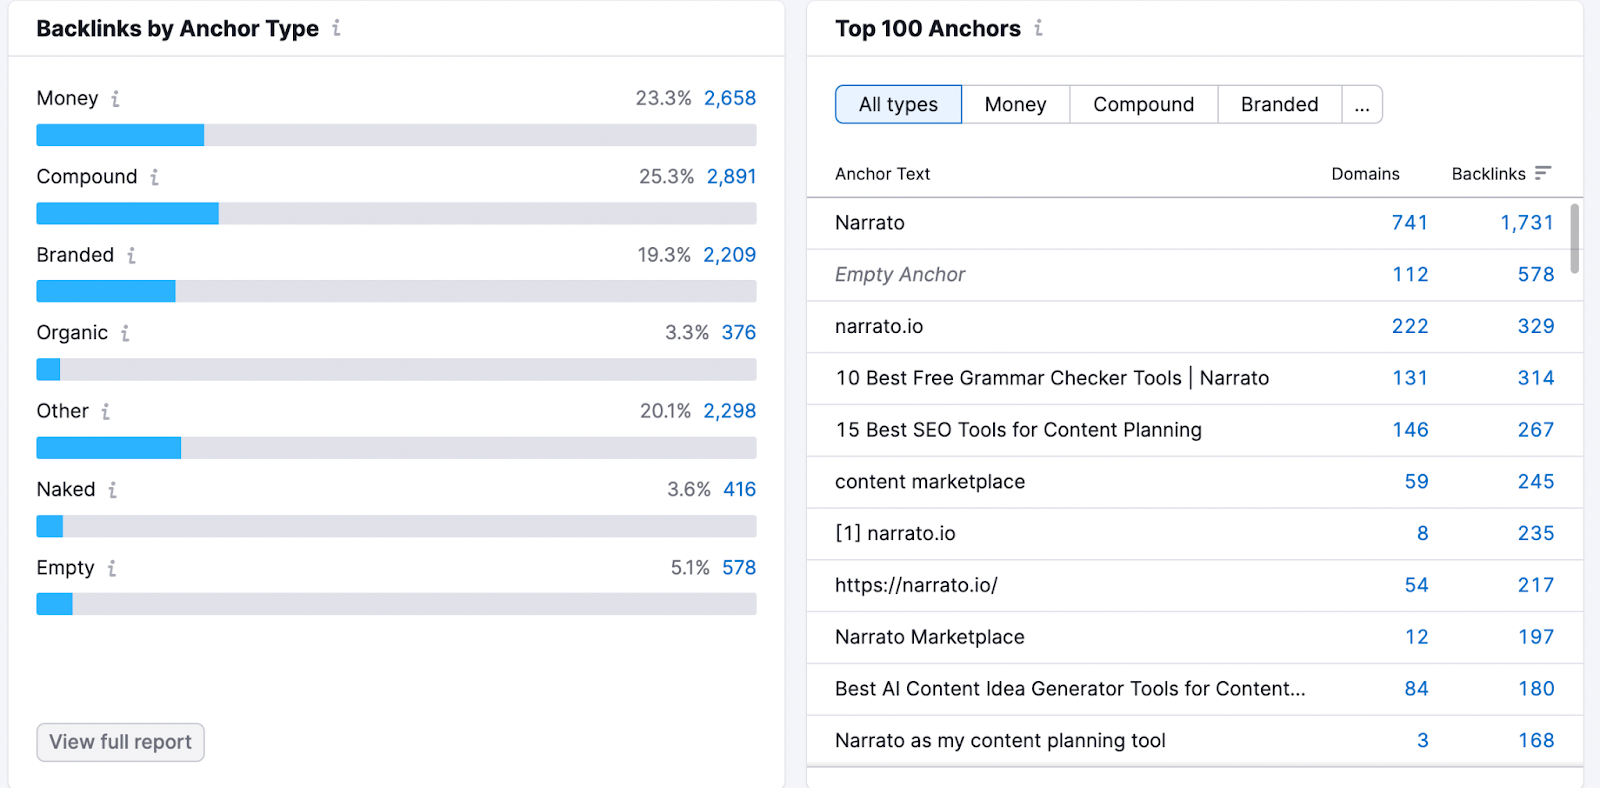 “Backlinks by Anchor Type” and “Top 100 Anchors” sections in the Backlink Audit tool